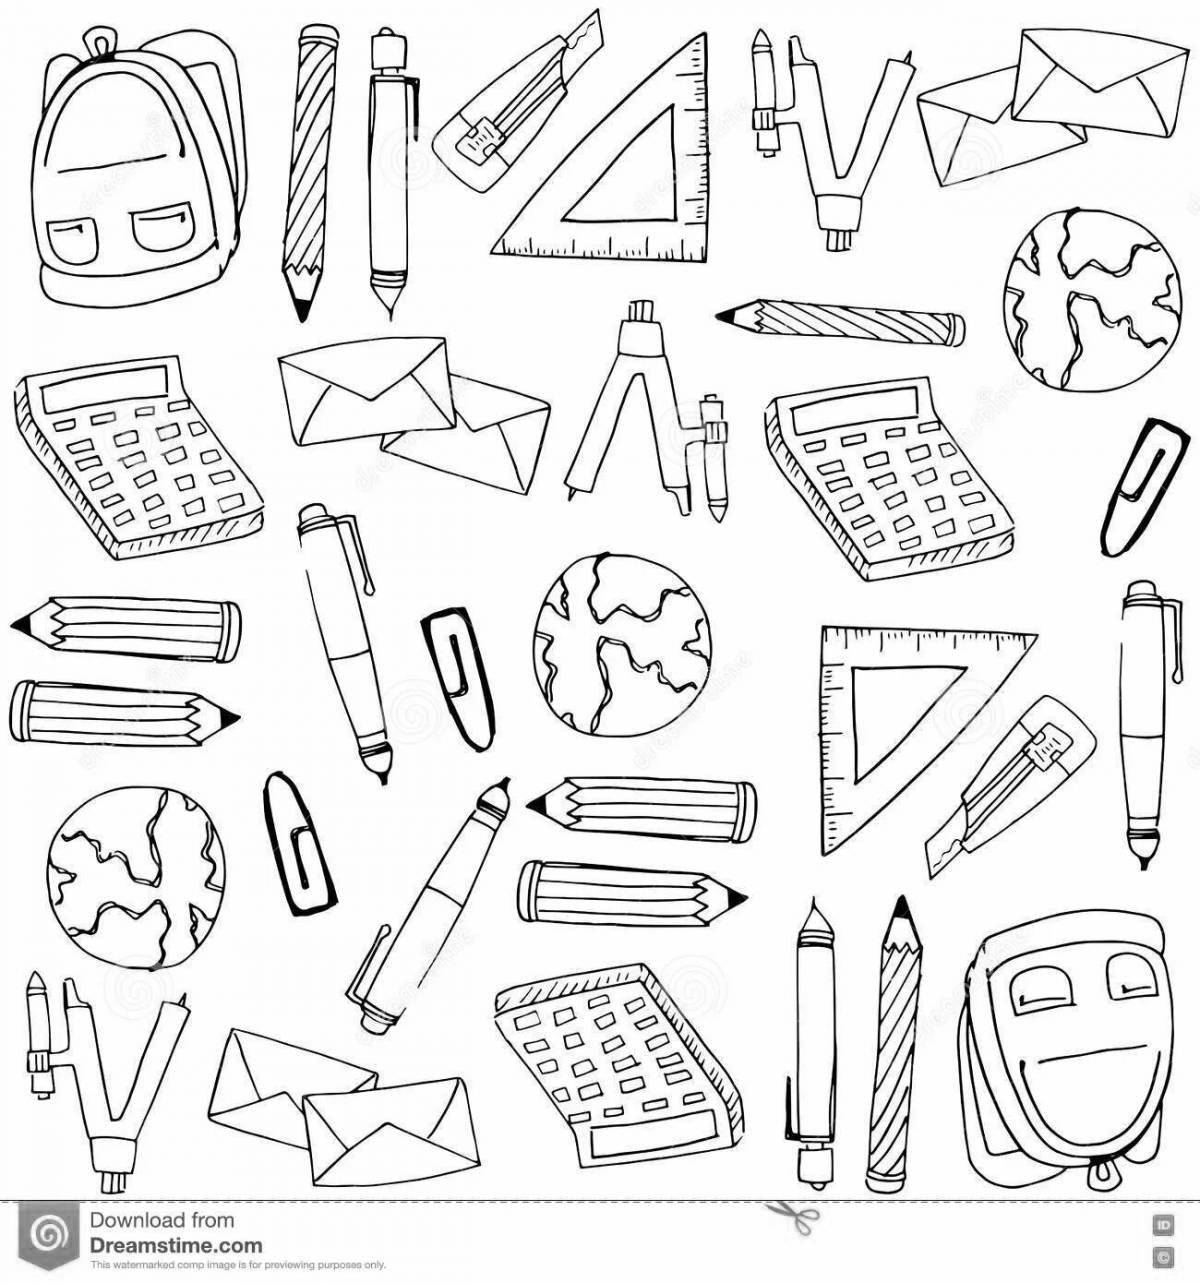 Colourful coloring pages for study